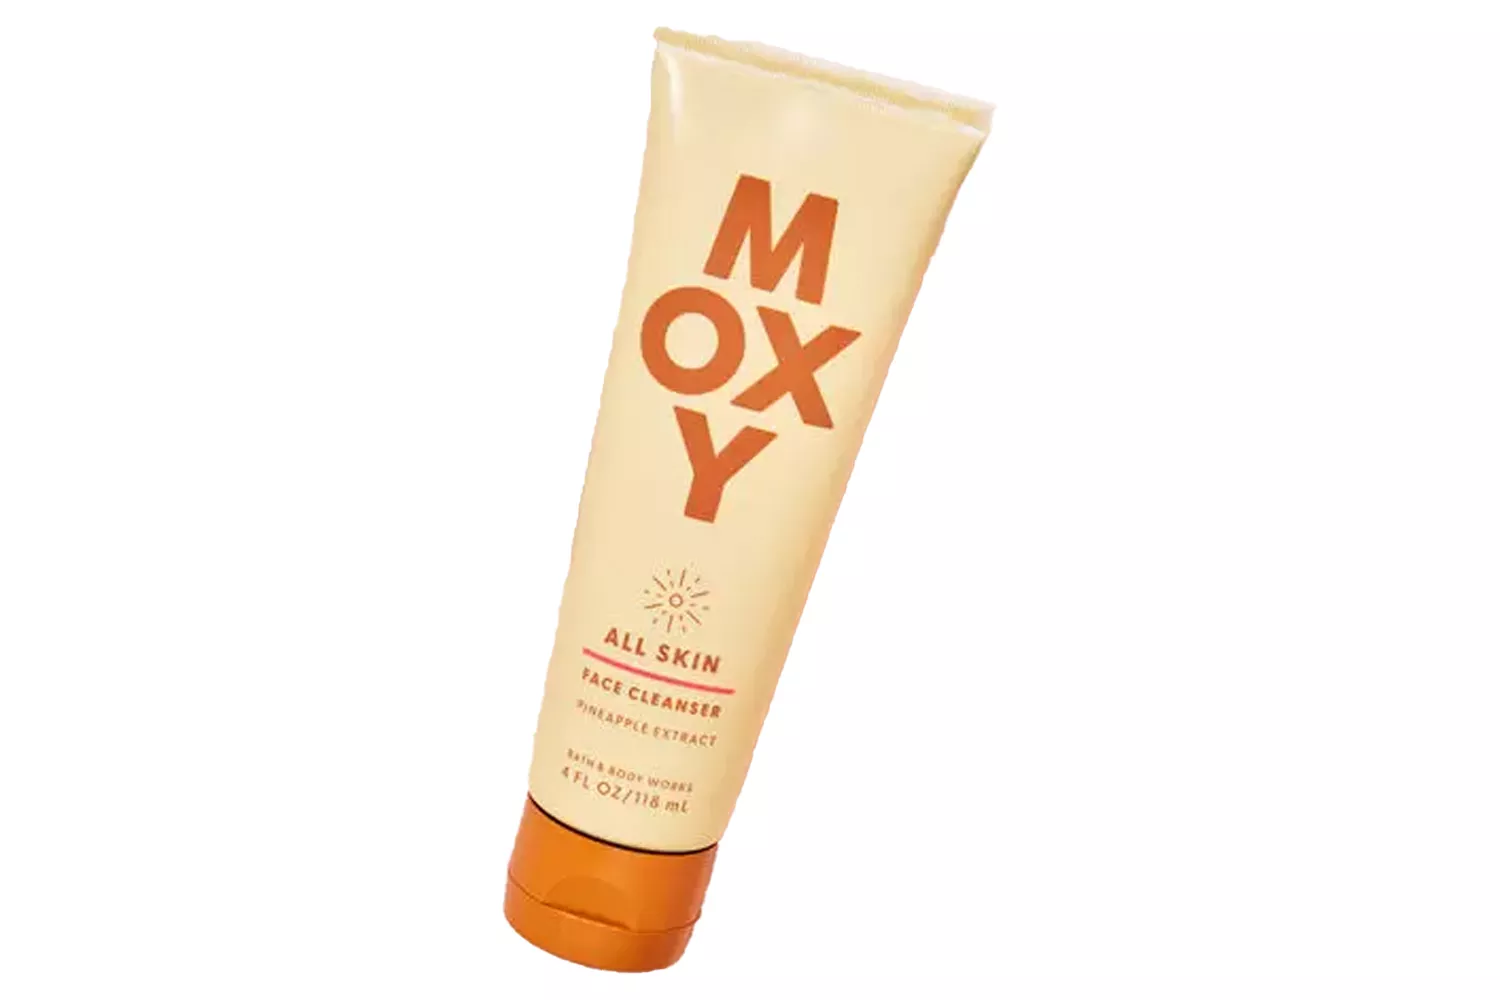 moxy-all-skin-face-cleanser